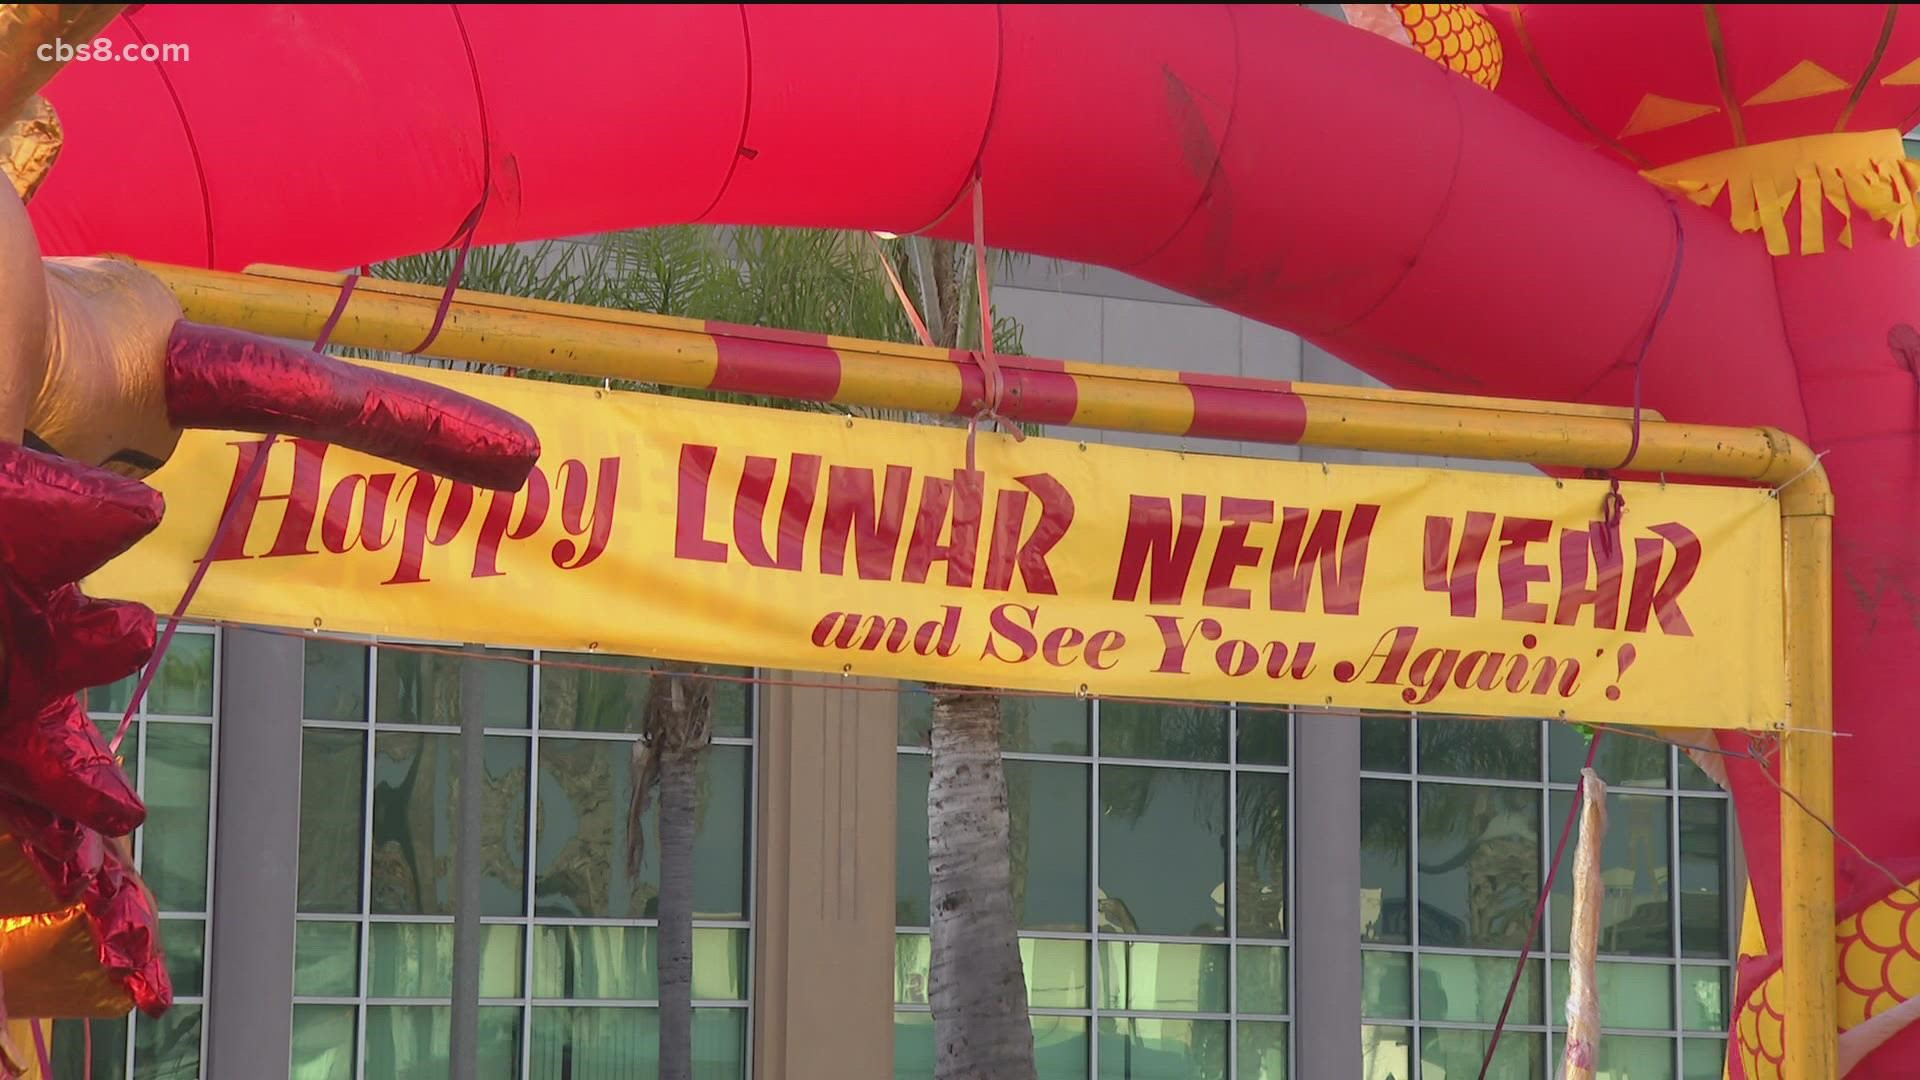 San Diego's annual Lunar New Year Festival kicked off this weekend ahead of the official start on February 1.